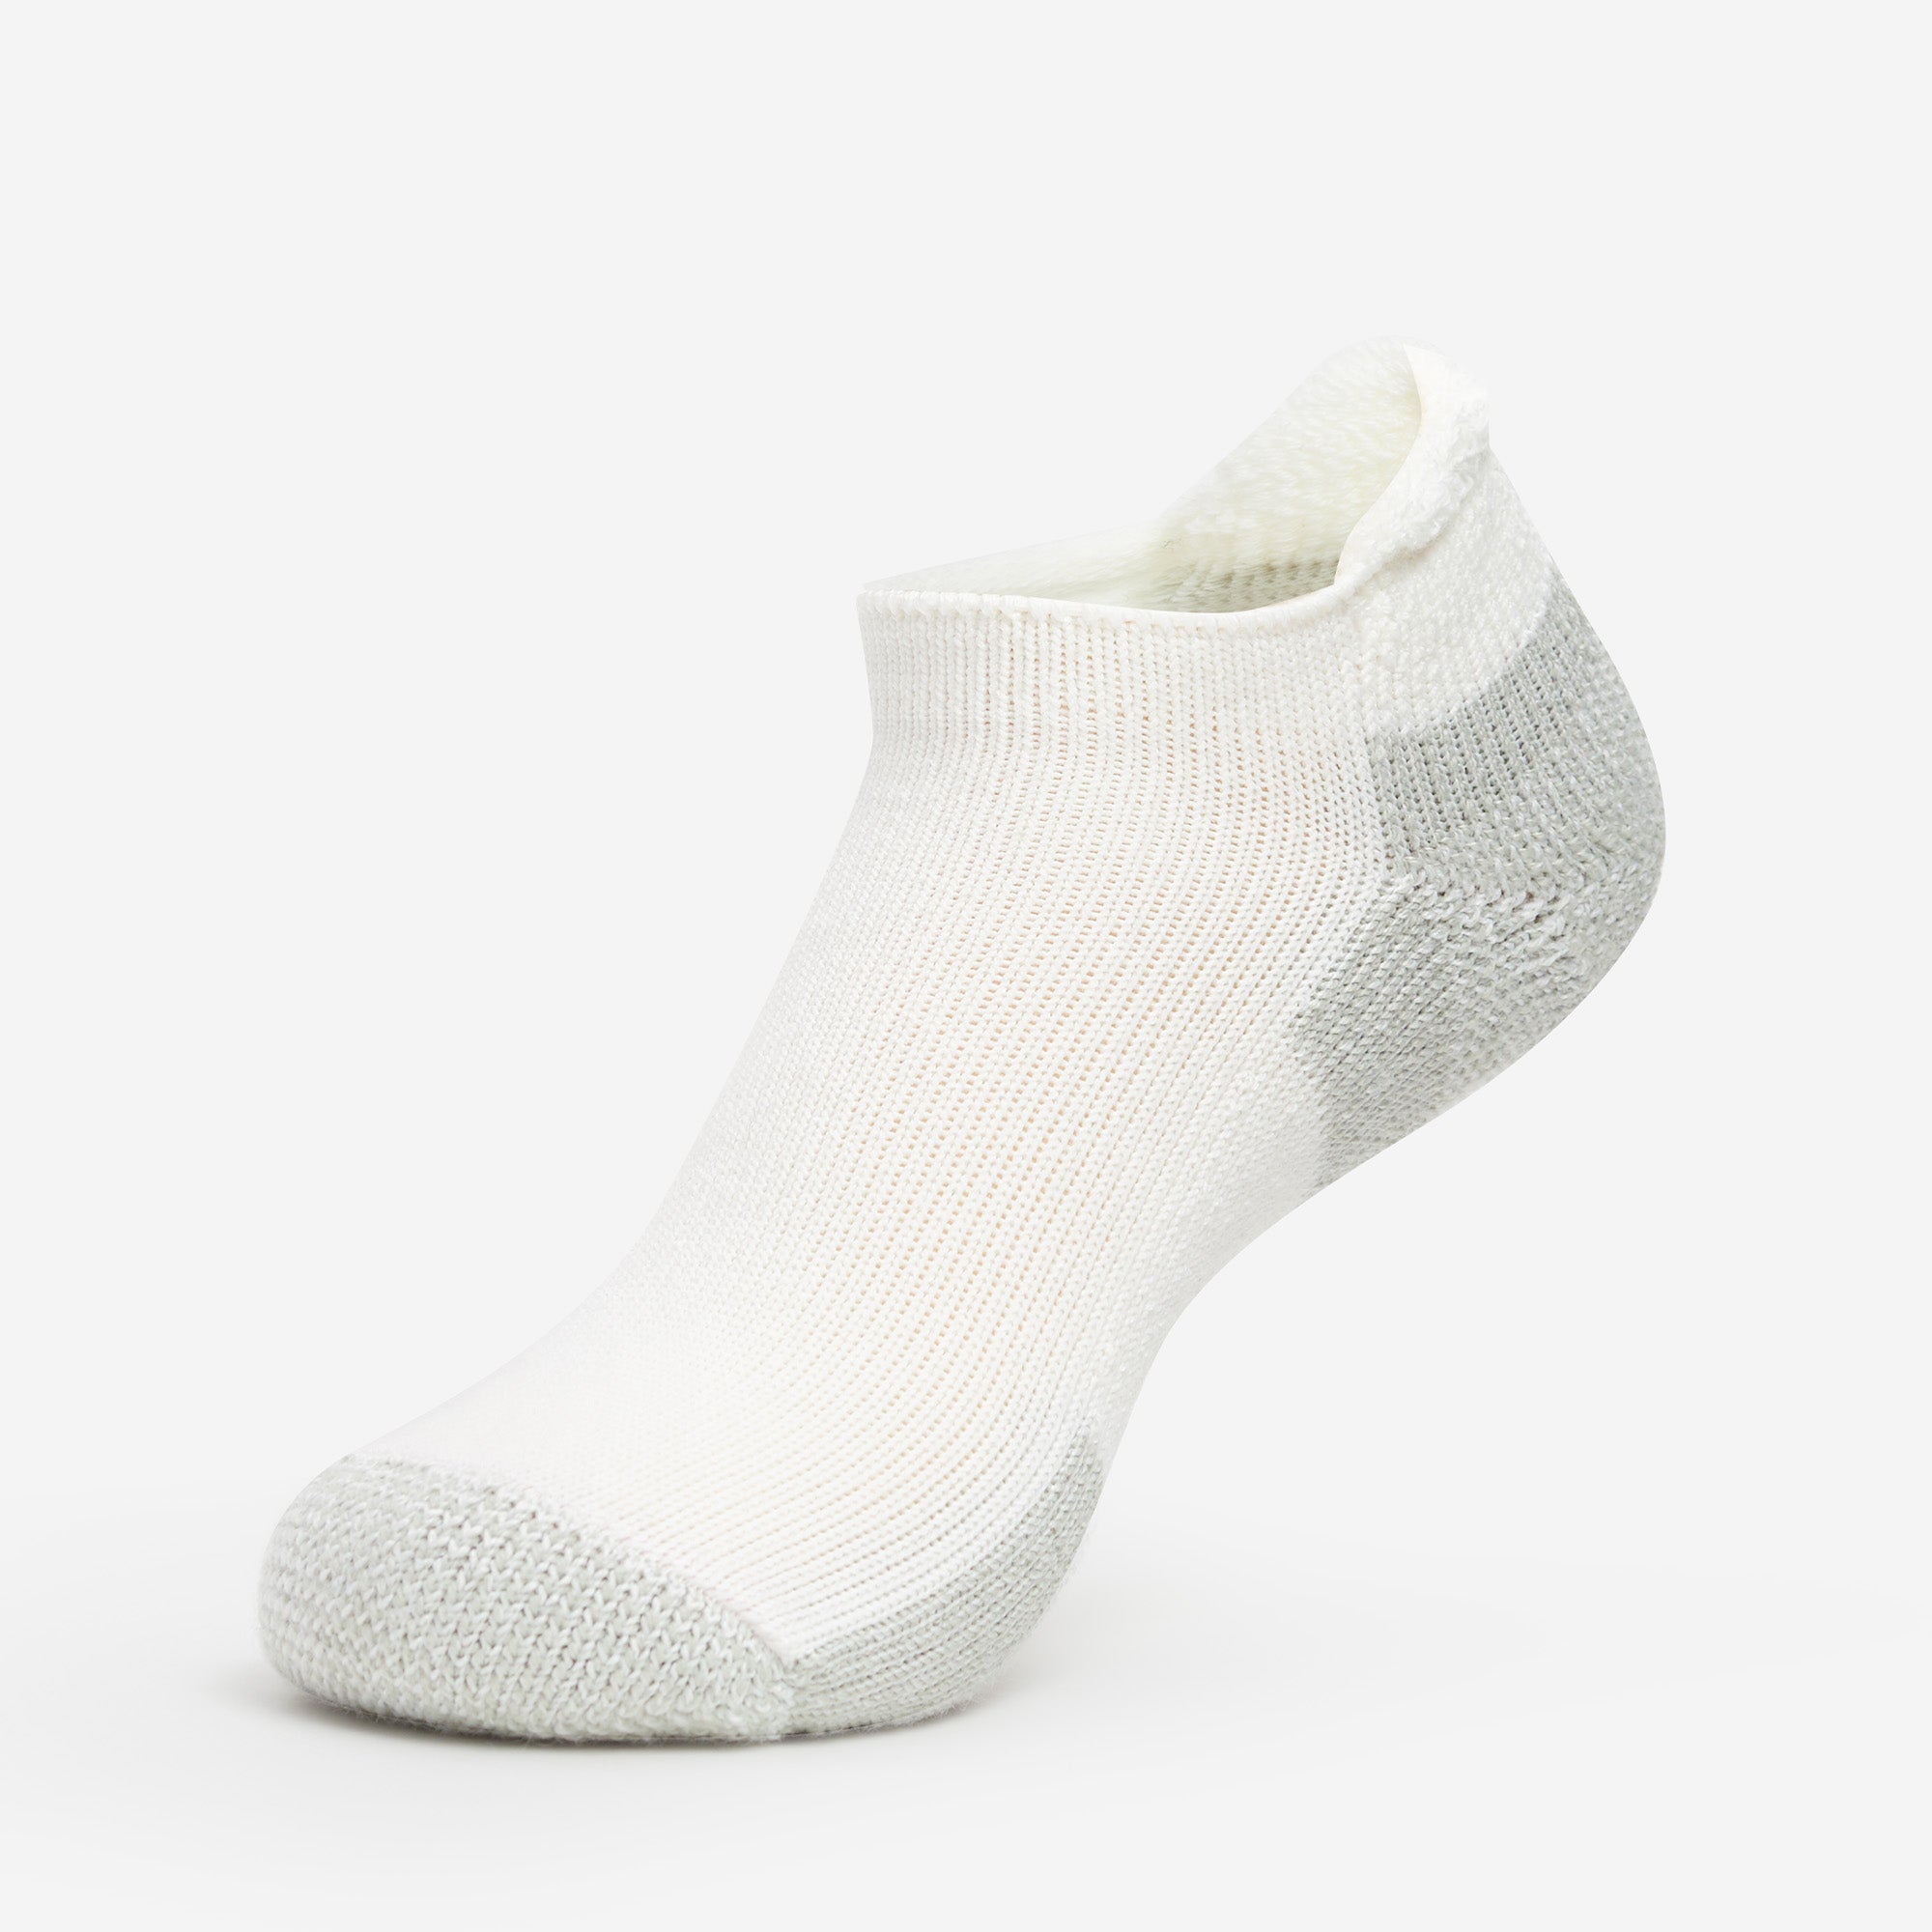  ATBITER Ankle Socks Womens and Men 8/6Pairs Thin